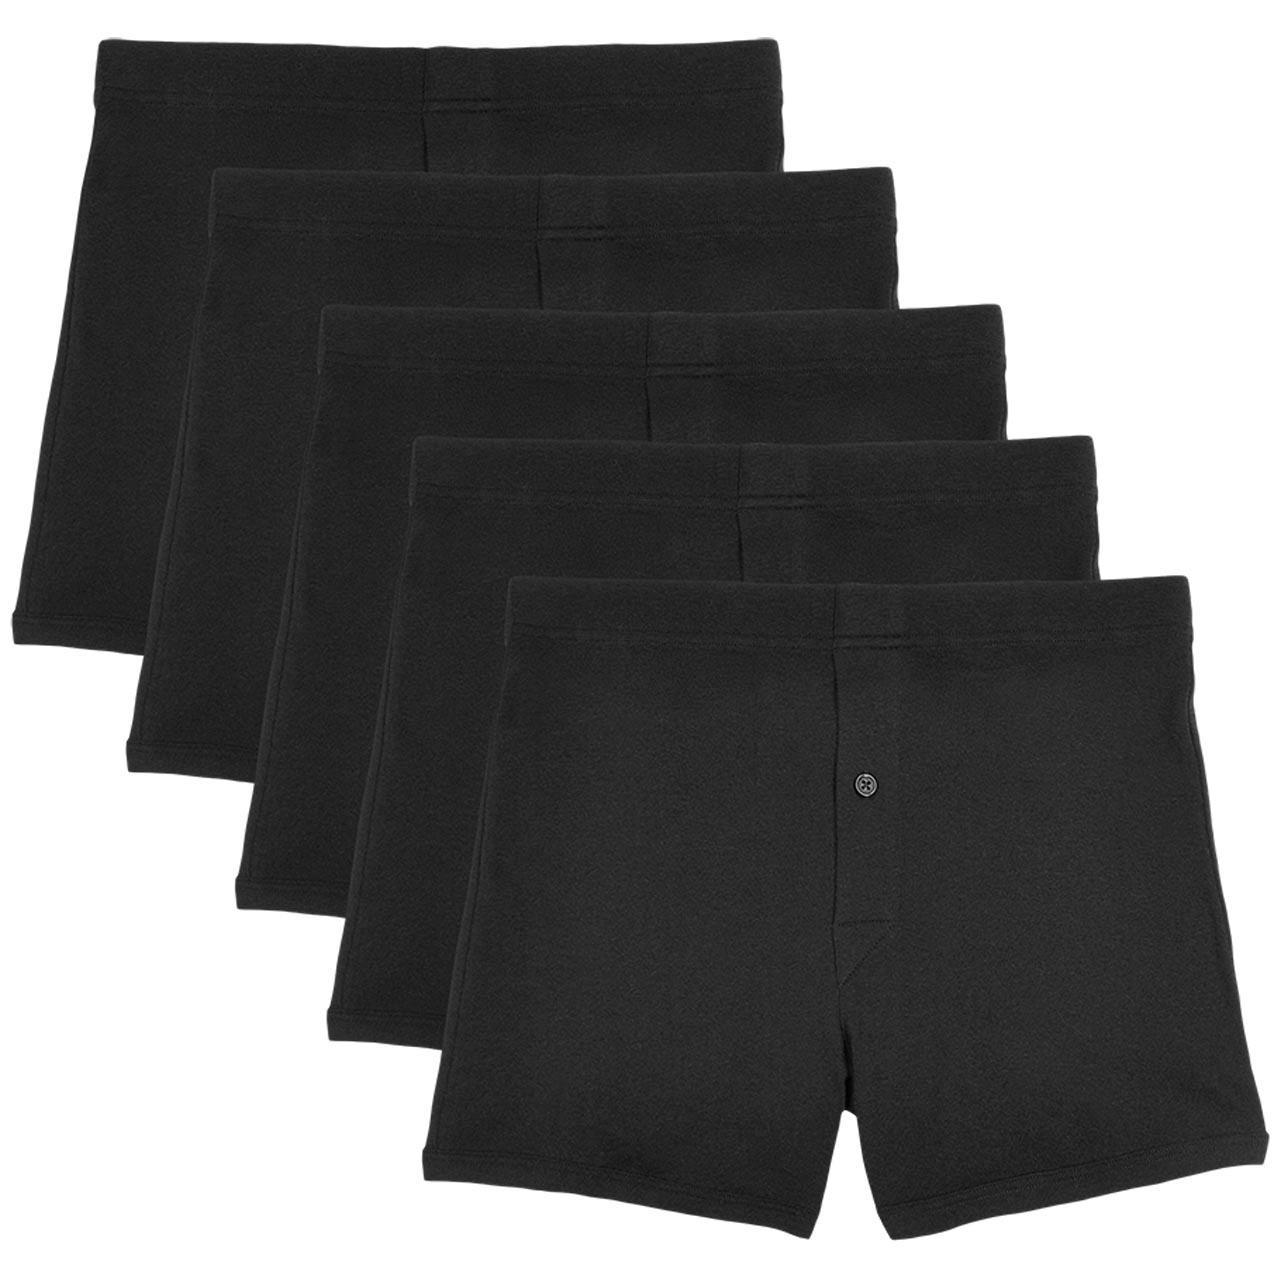 M&S Mens Collection Pure Cotton Trunks 5 pack, L, Black - HelloSupermarket